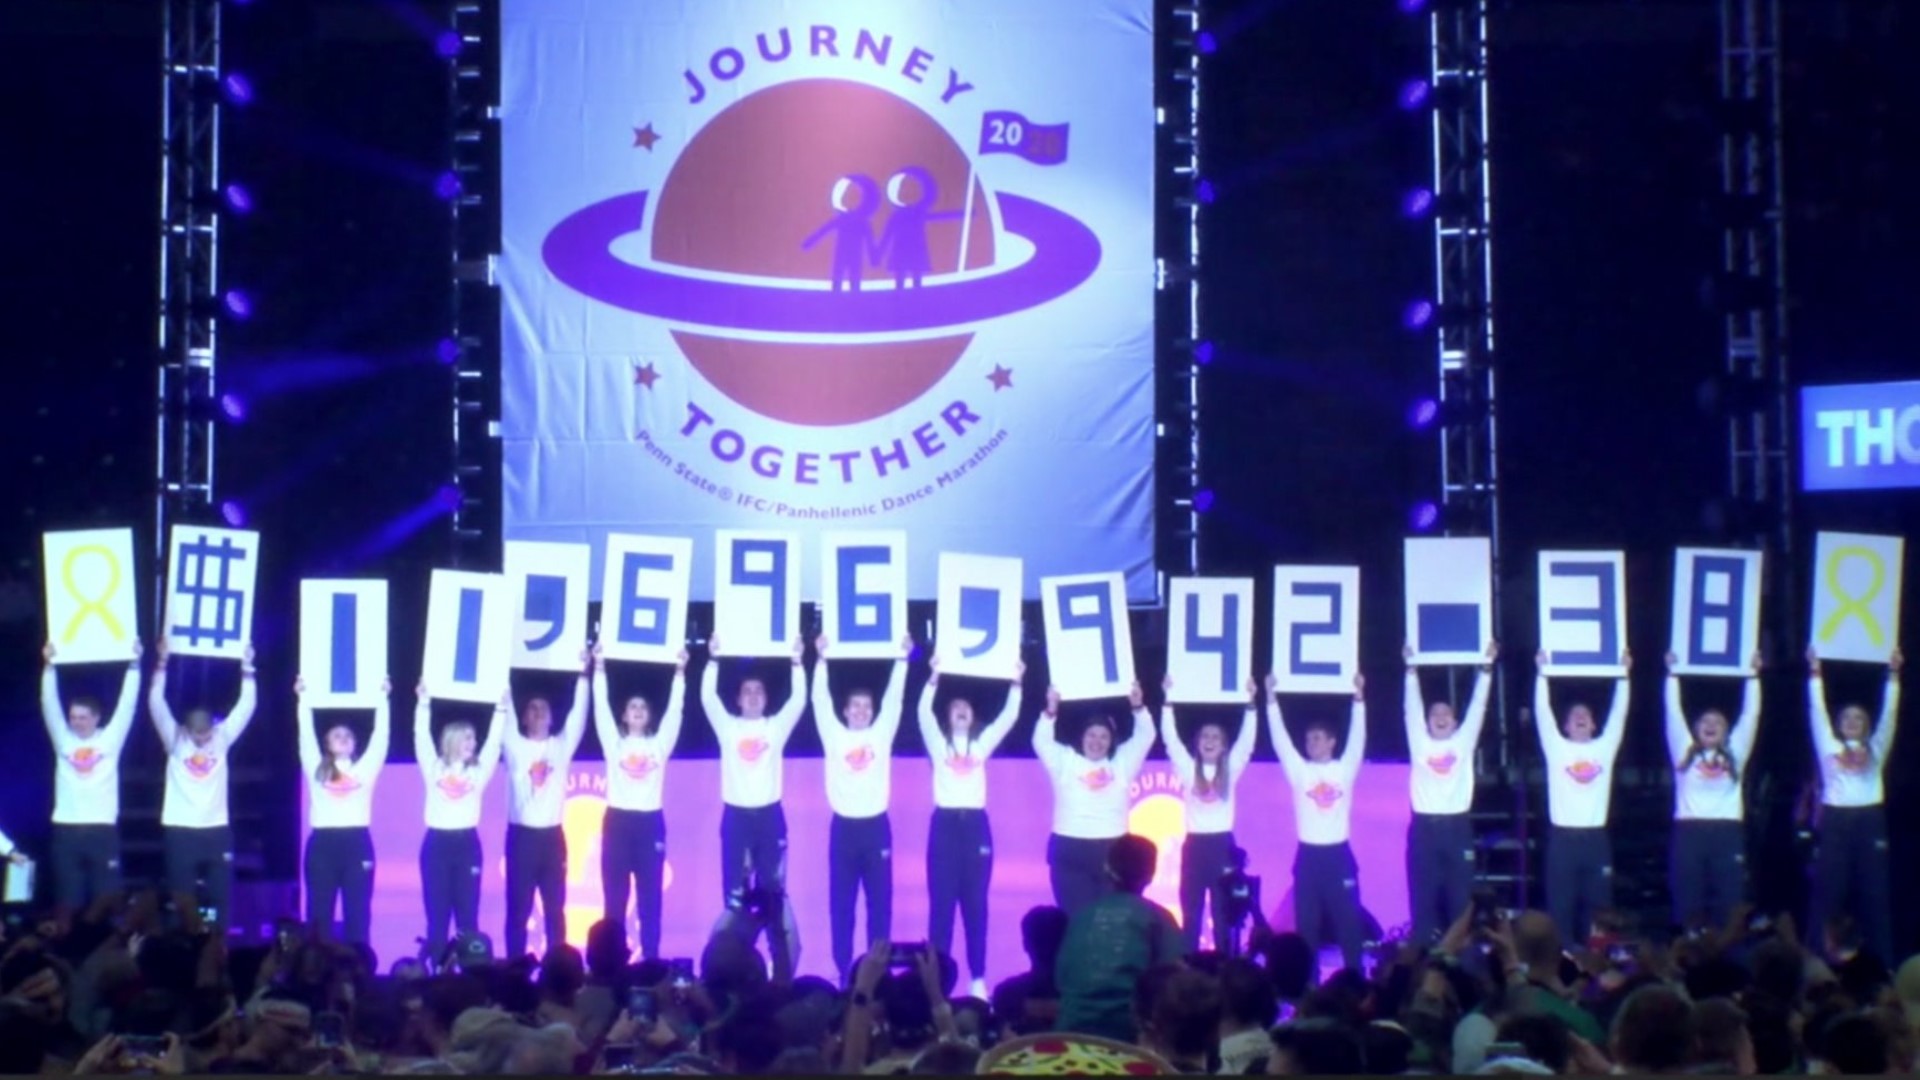 The money raised at the dance marathon benefits researchers and families at the Penn State Hershey Medical Center.